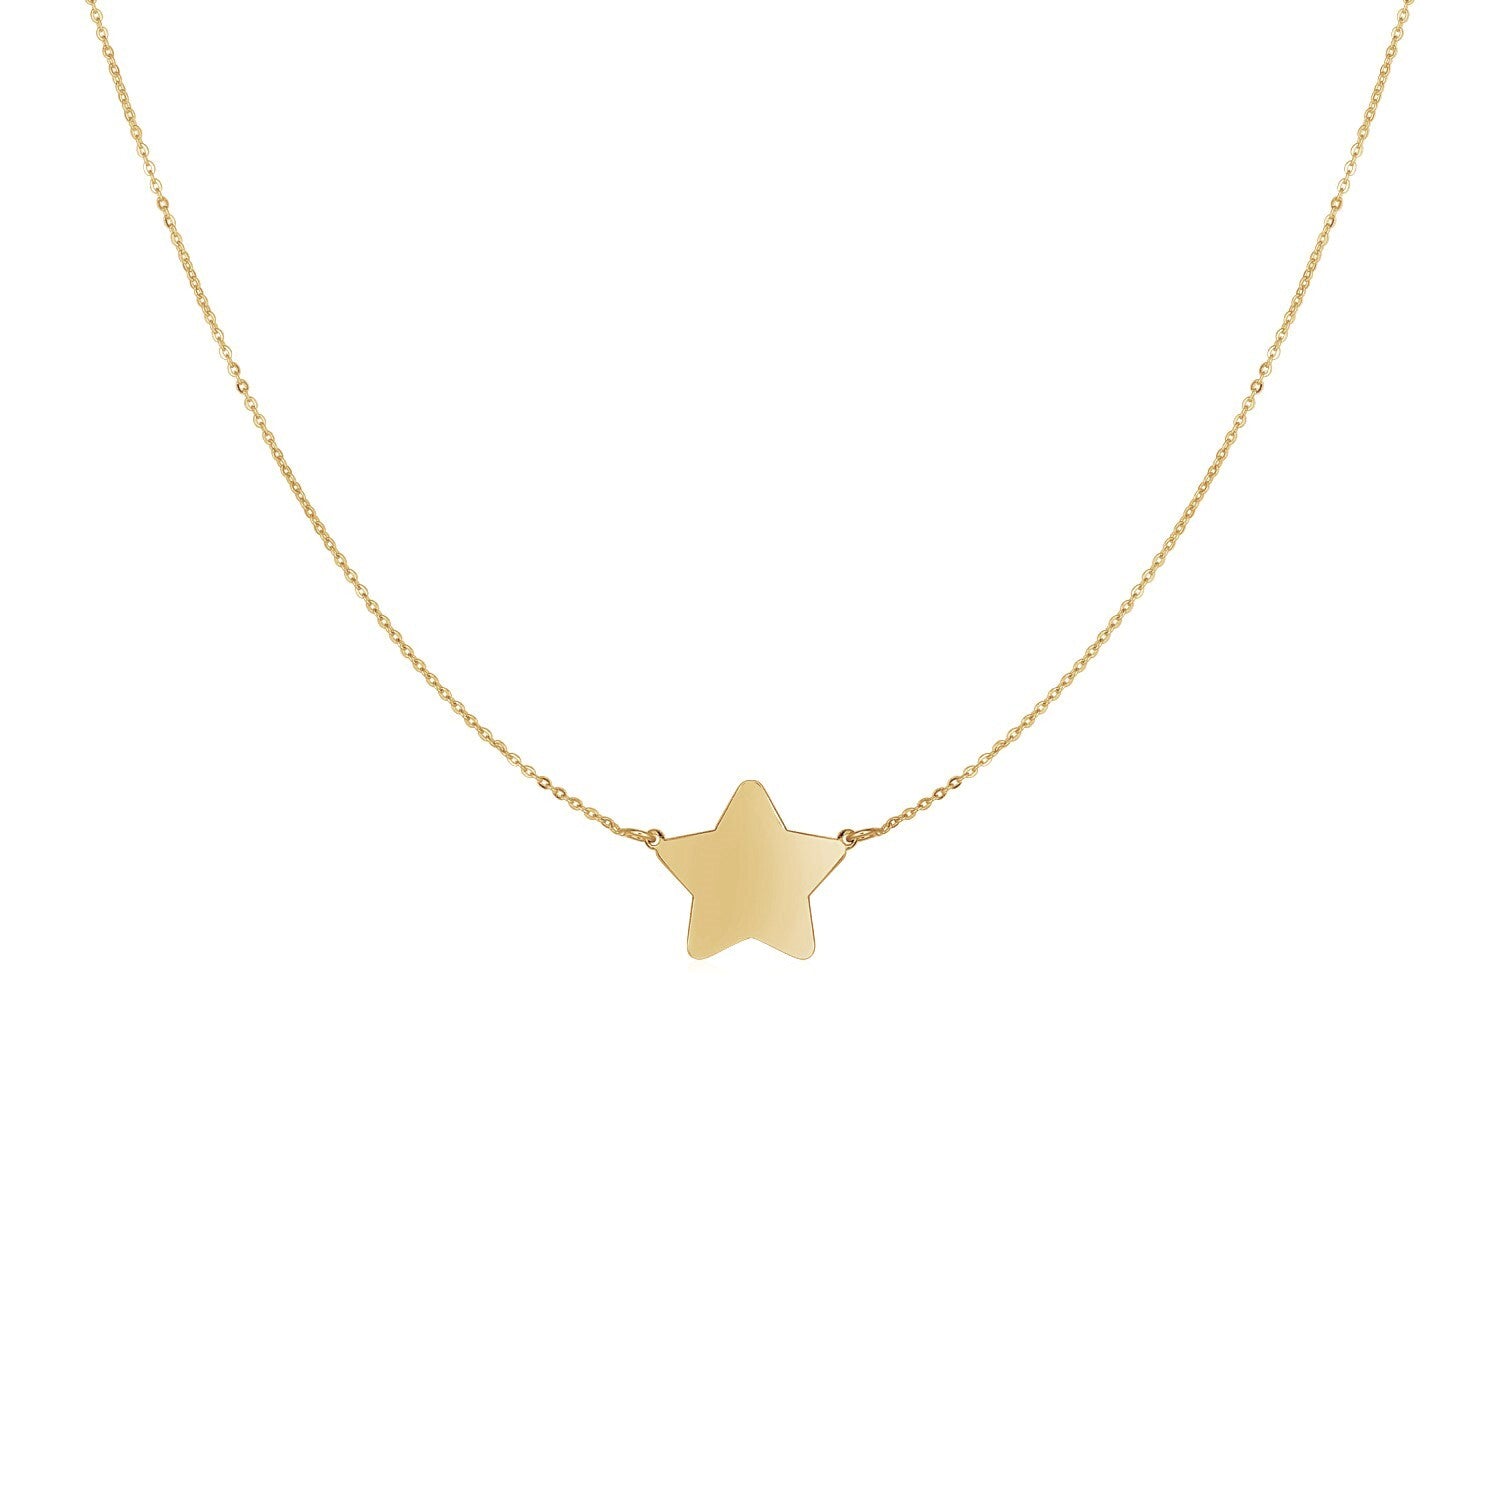 14k Yellow Gold Necklace with Five Pointed Star, size 18''